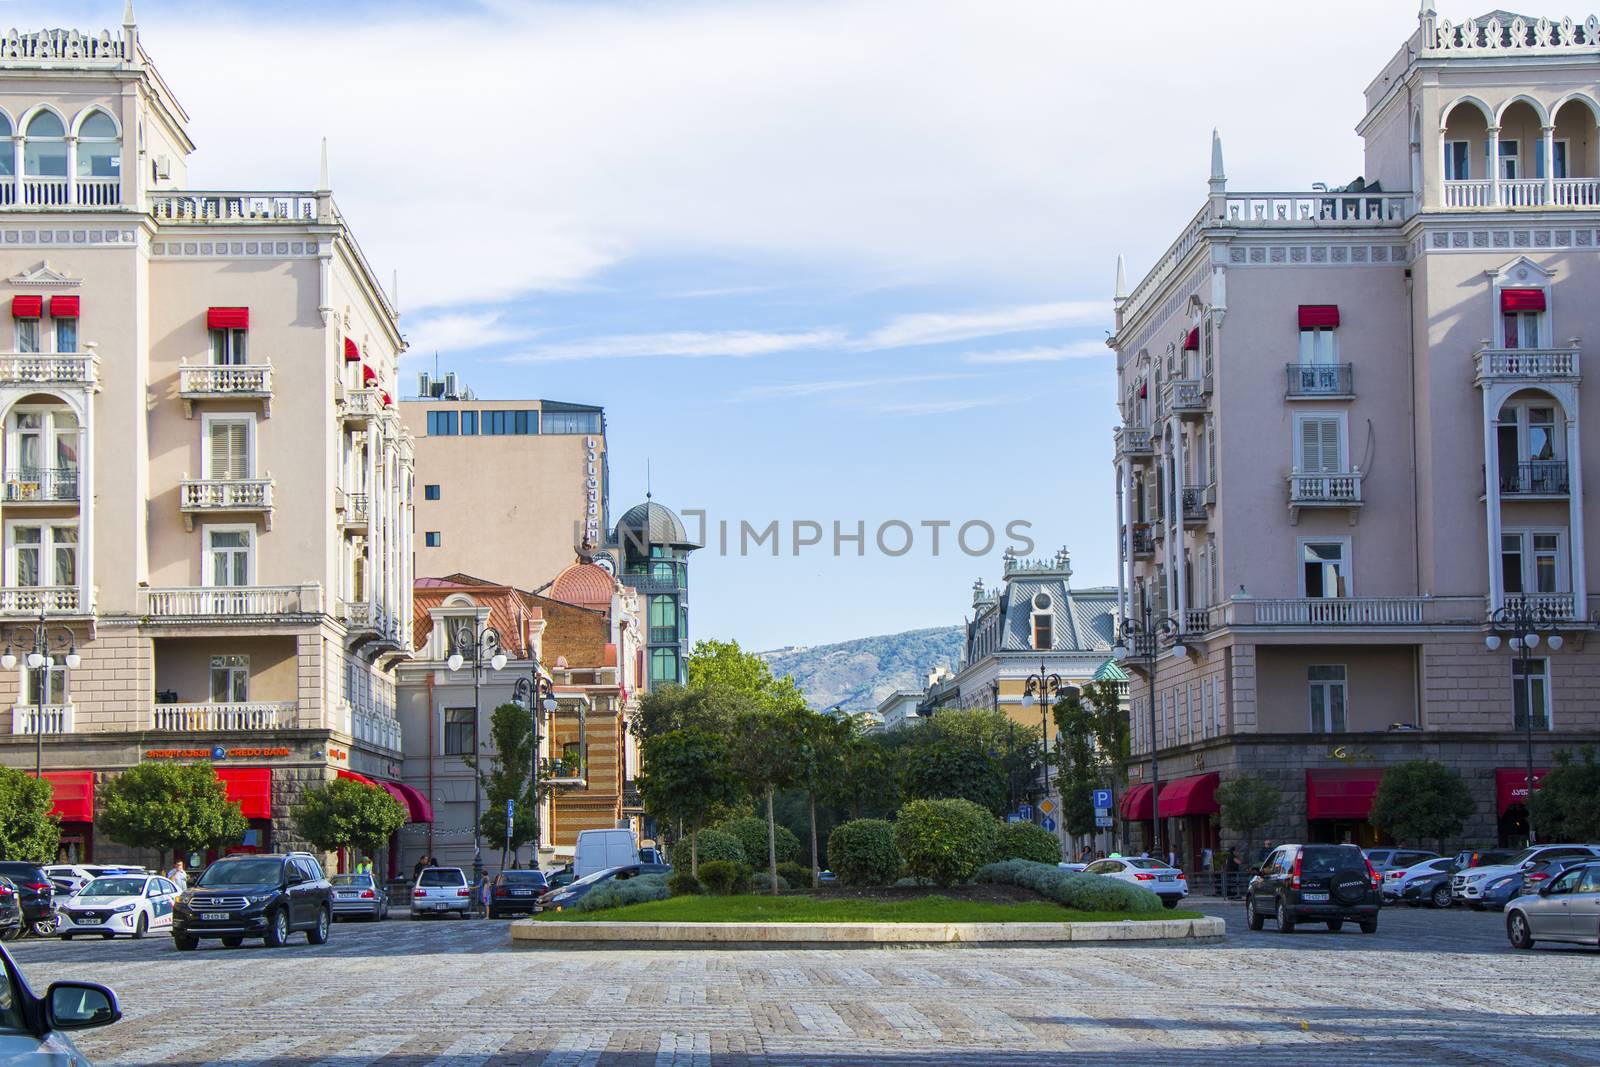 Tbilisi city center, street situation, people, cars and buildings. by Taidundua